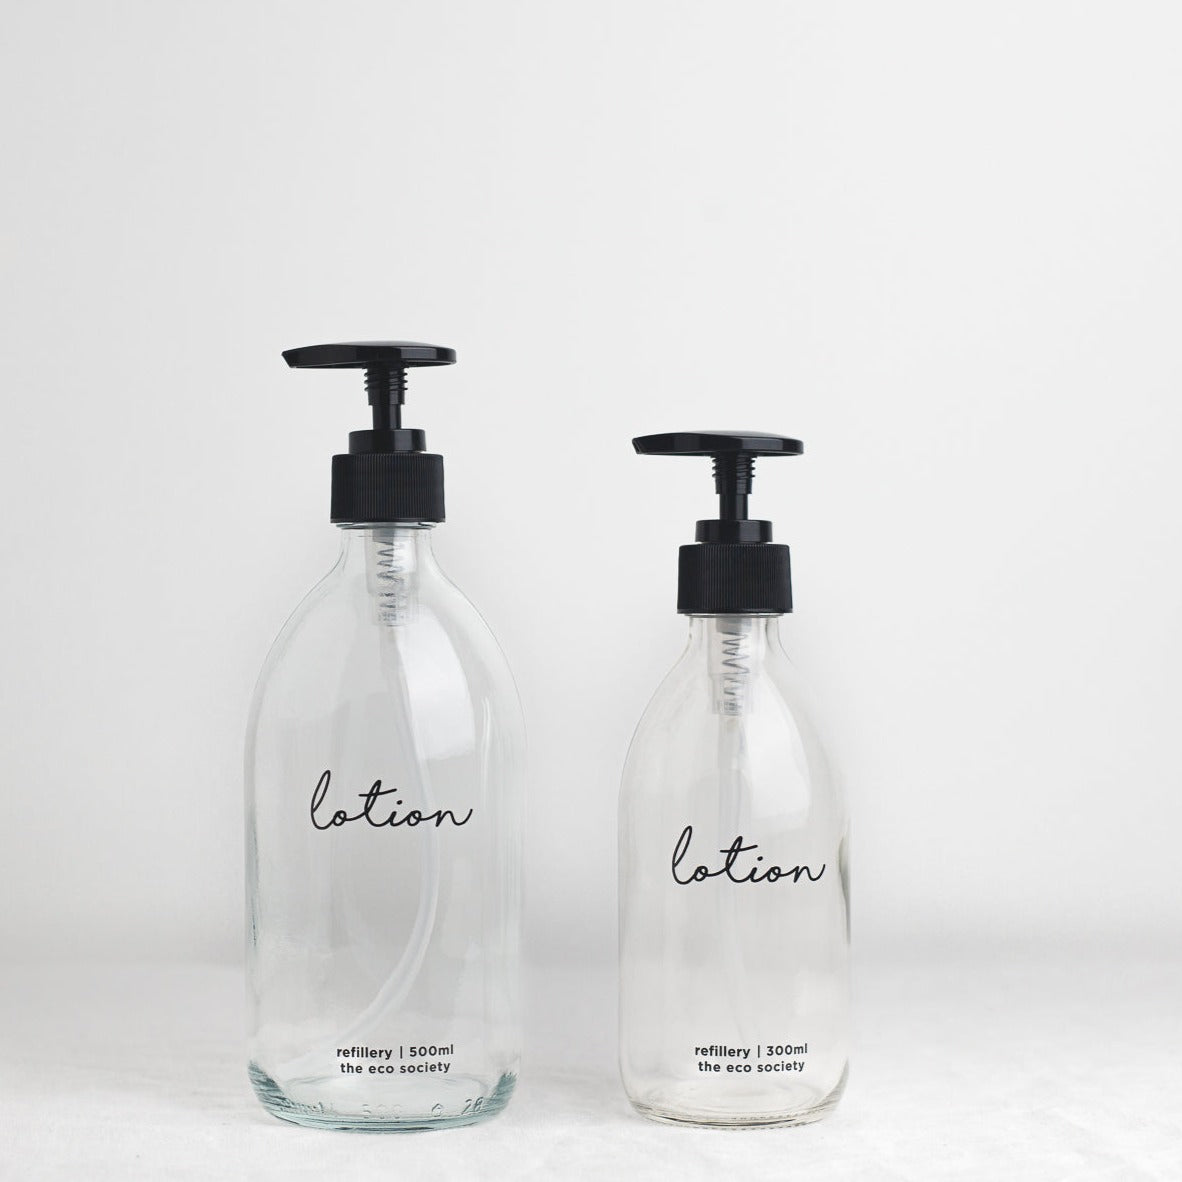 Clear Glass Bottle with Black printed text "Lotion" 300ml and 500ml Refillery Bottle